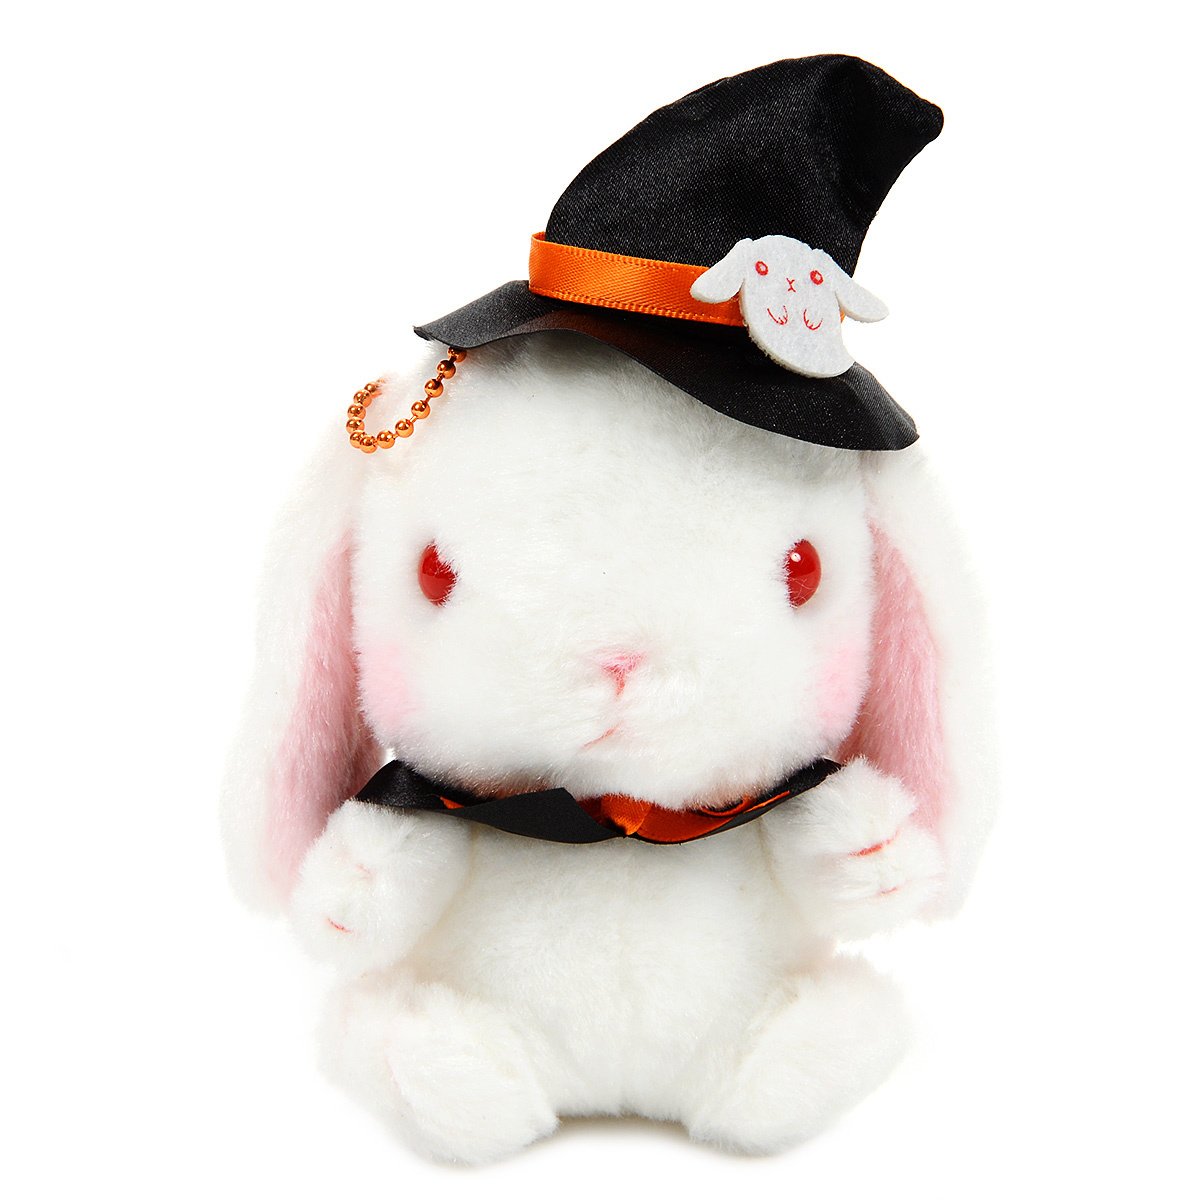 Amuse Halloween Bunny Plushie Cute Stuffed Animal Toy White 4 Inches